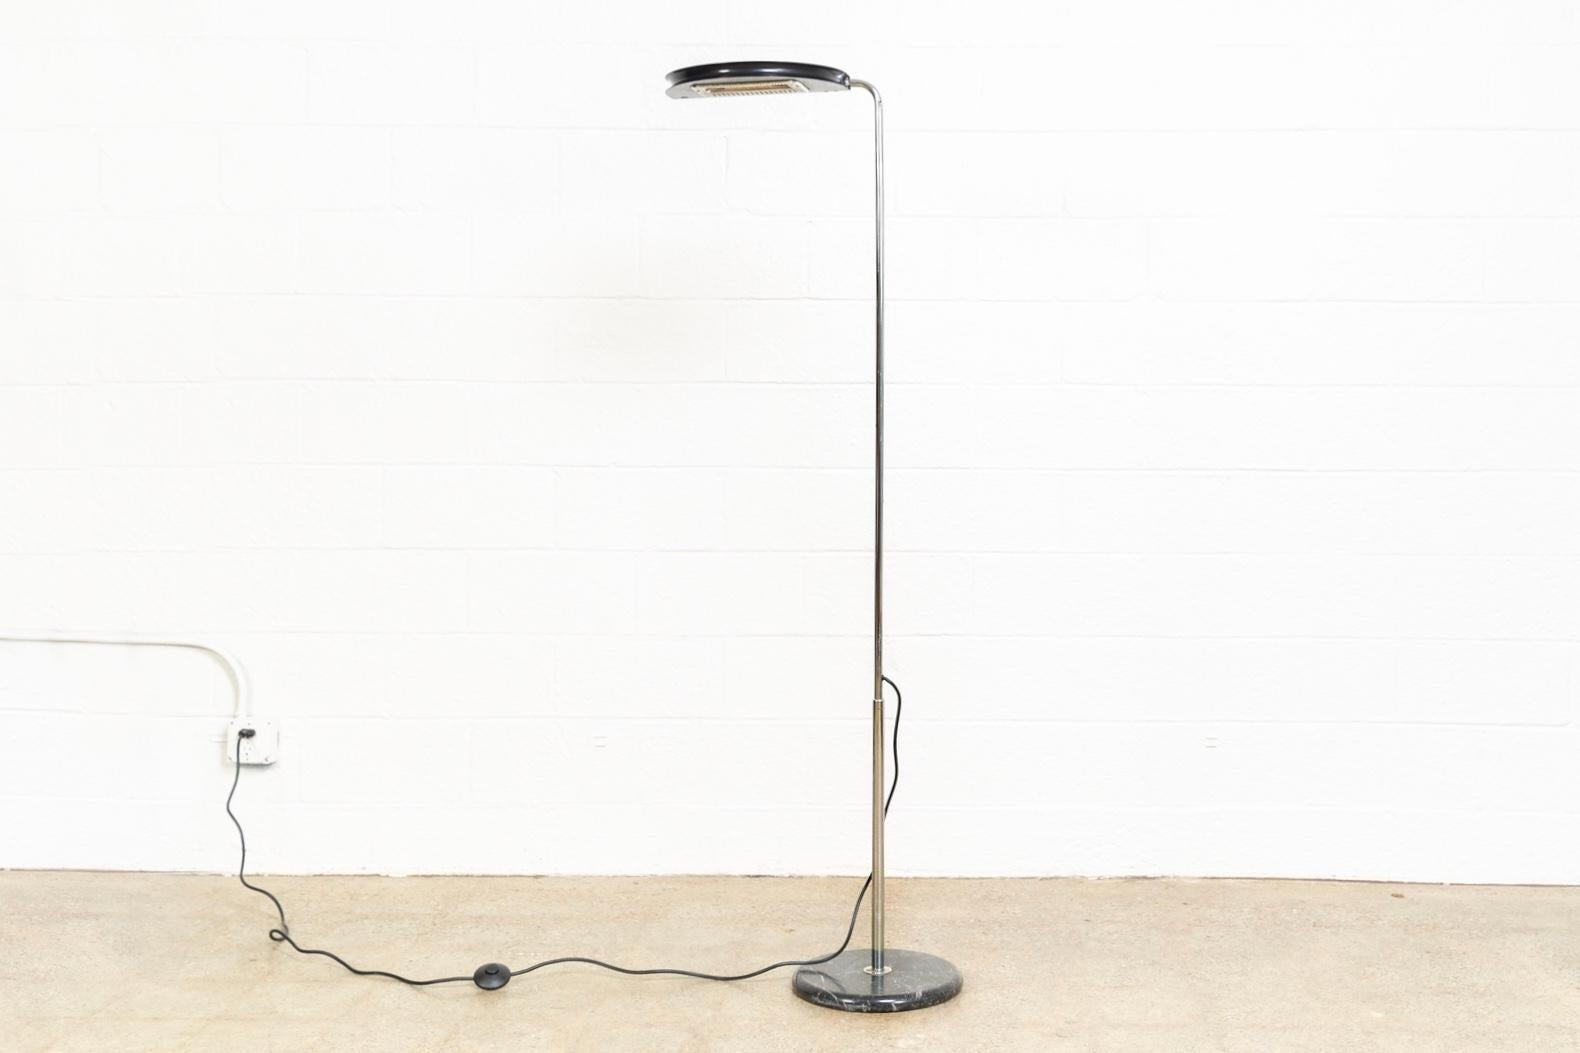 This vintage Mid-Century Modern Italian Bruno Gecchelin “Mezzaluna“ floor lamp is circa 1970. The sleek Space Age modernist design features a chrome-plated steel stem on a black Carrara marble base. The lamp swivels at the stem and the black